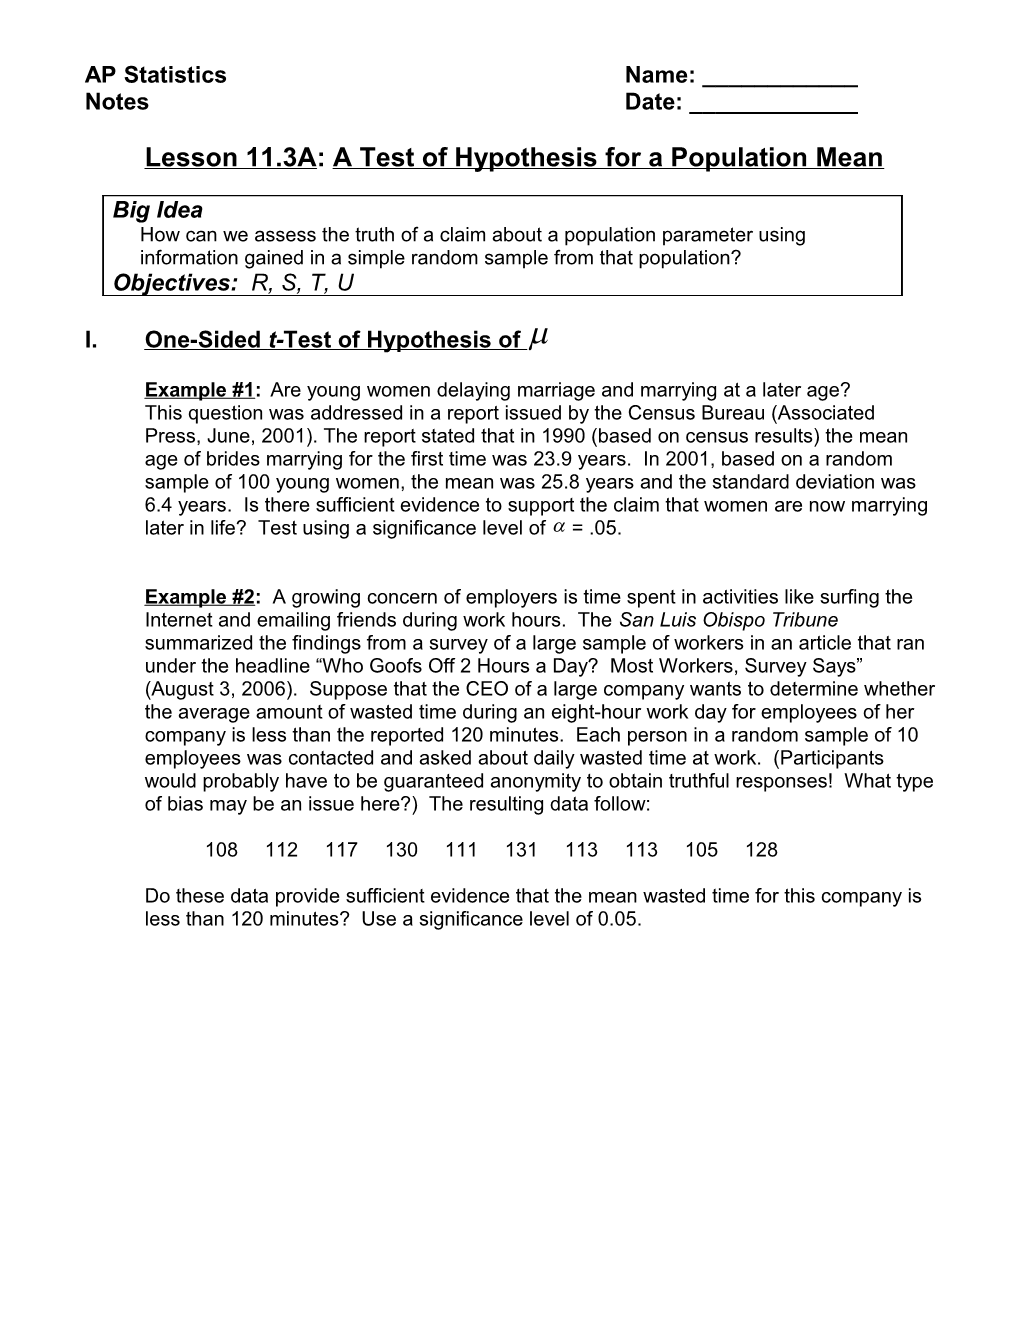 Lesson 11.3A: a Test of Hypothesis for a Population Mean